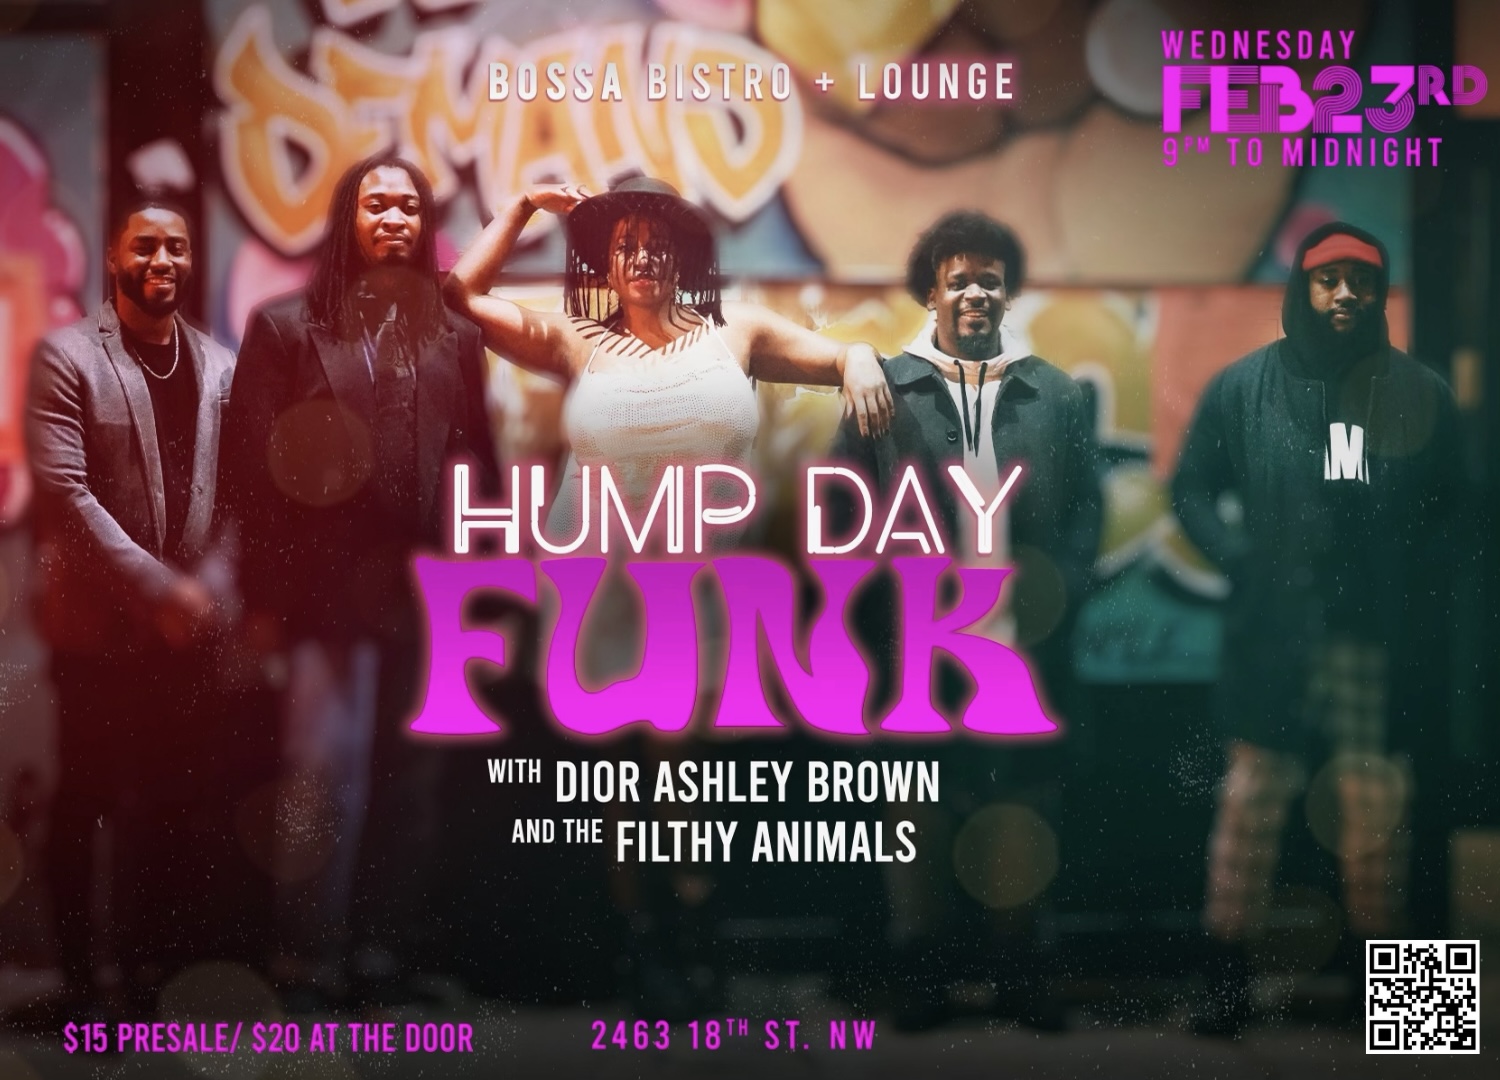 Hump Day Funk with Dior Ashley Brown and the Filthy Animals